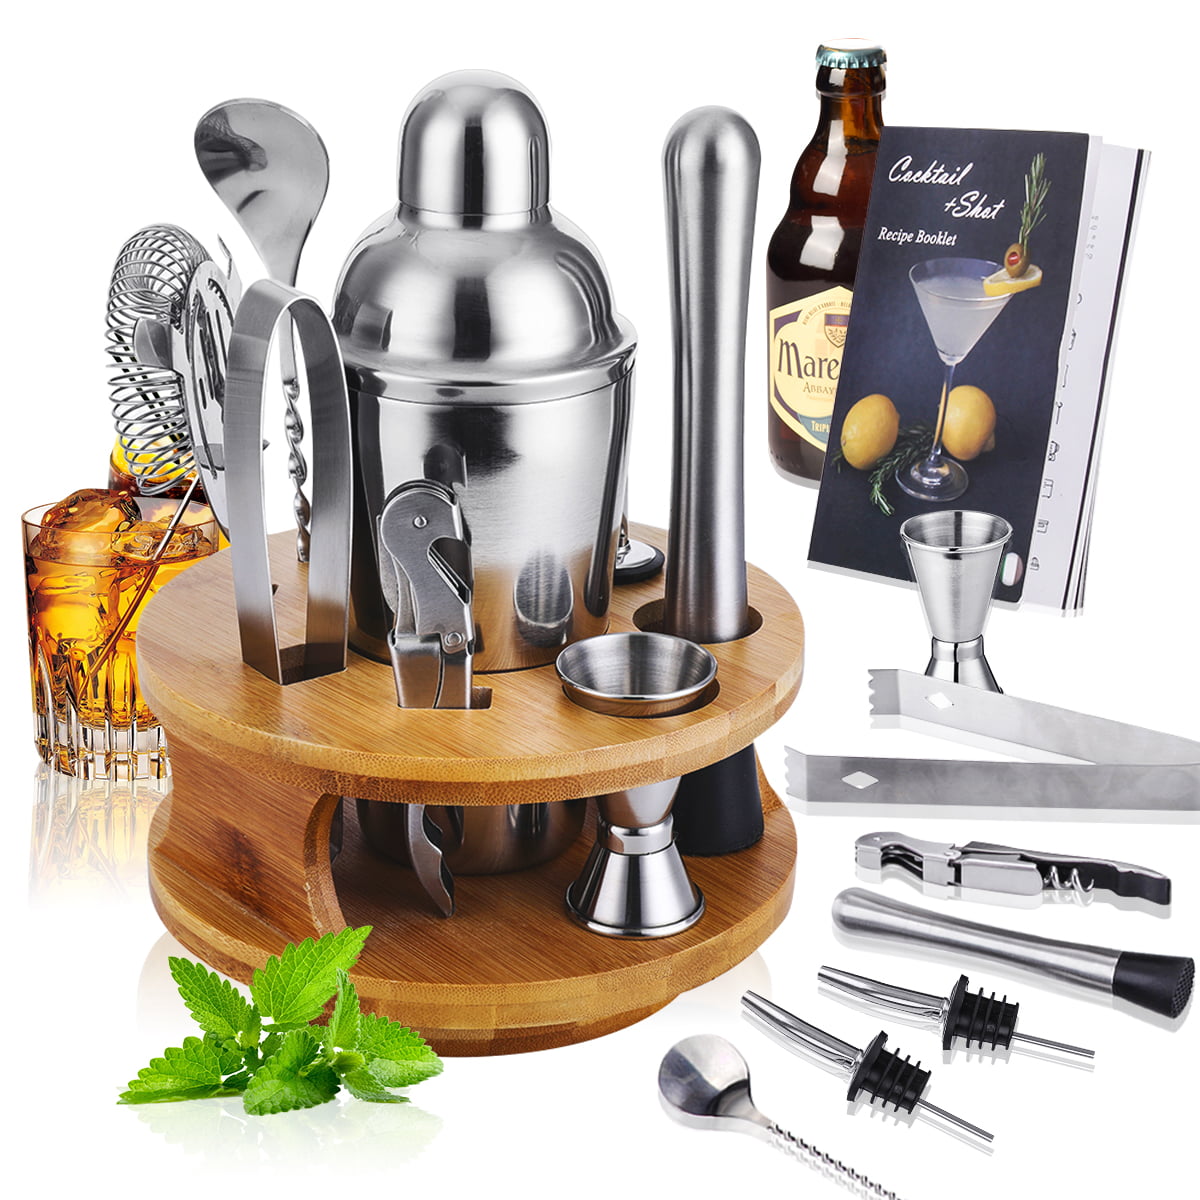 Stainless Steel Barte Details about   16-piece Professional Cocktail Shaker Set by Sip Culture 